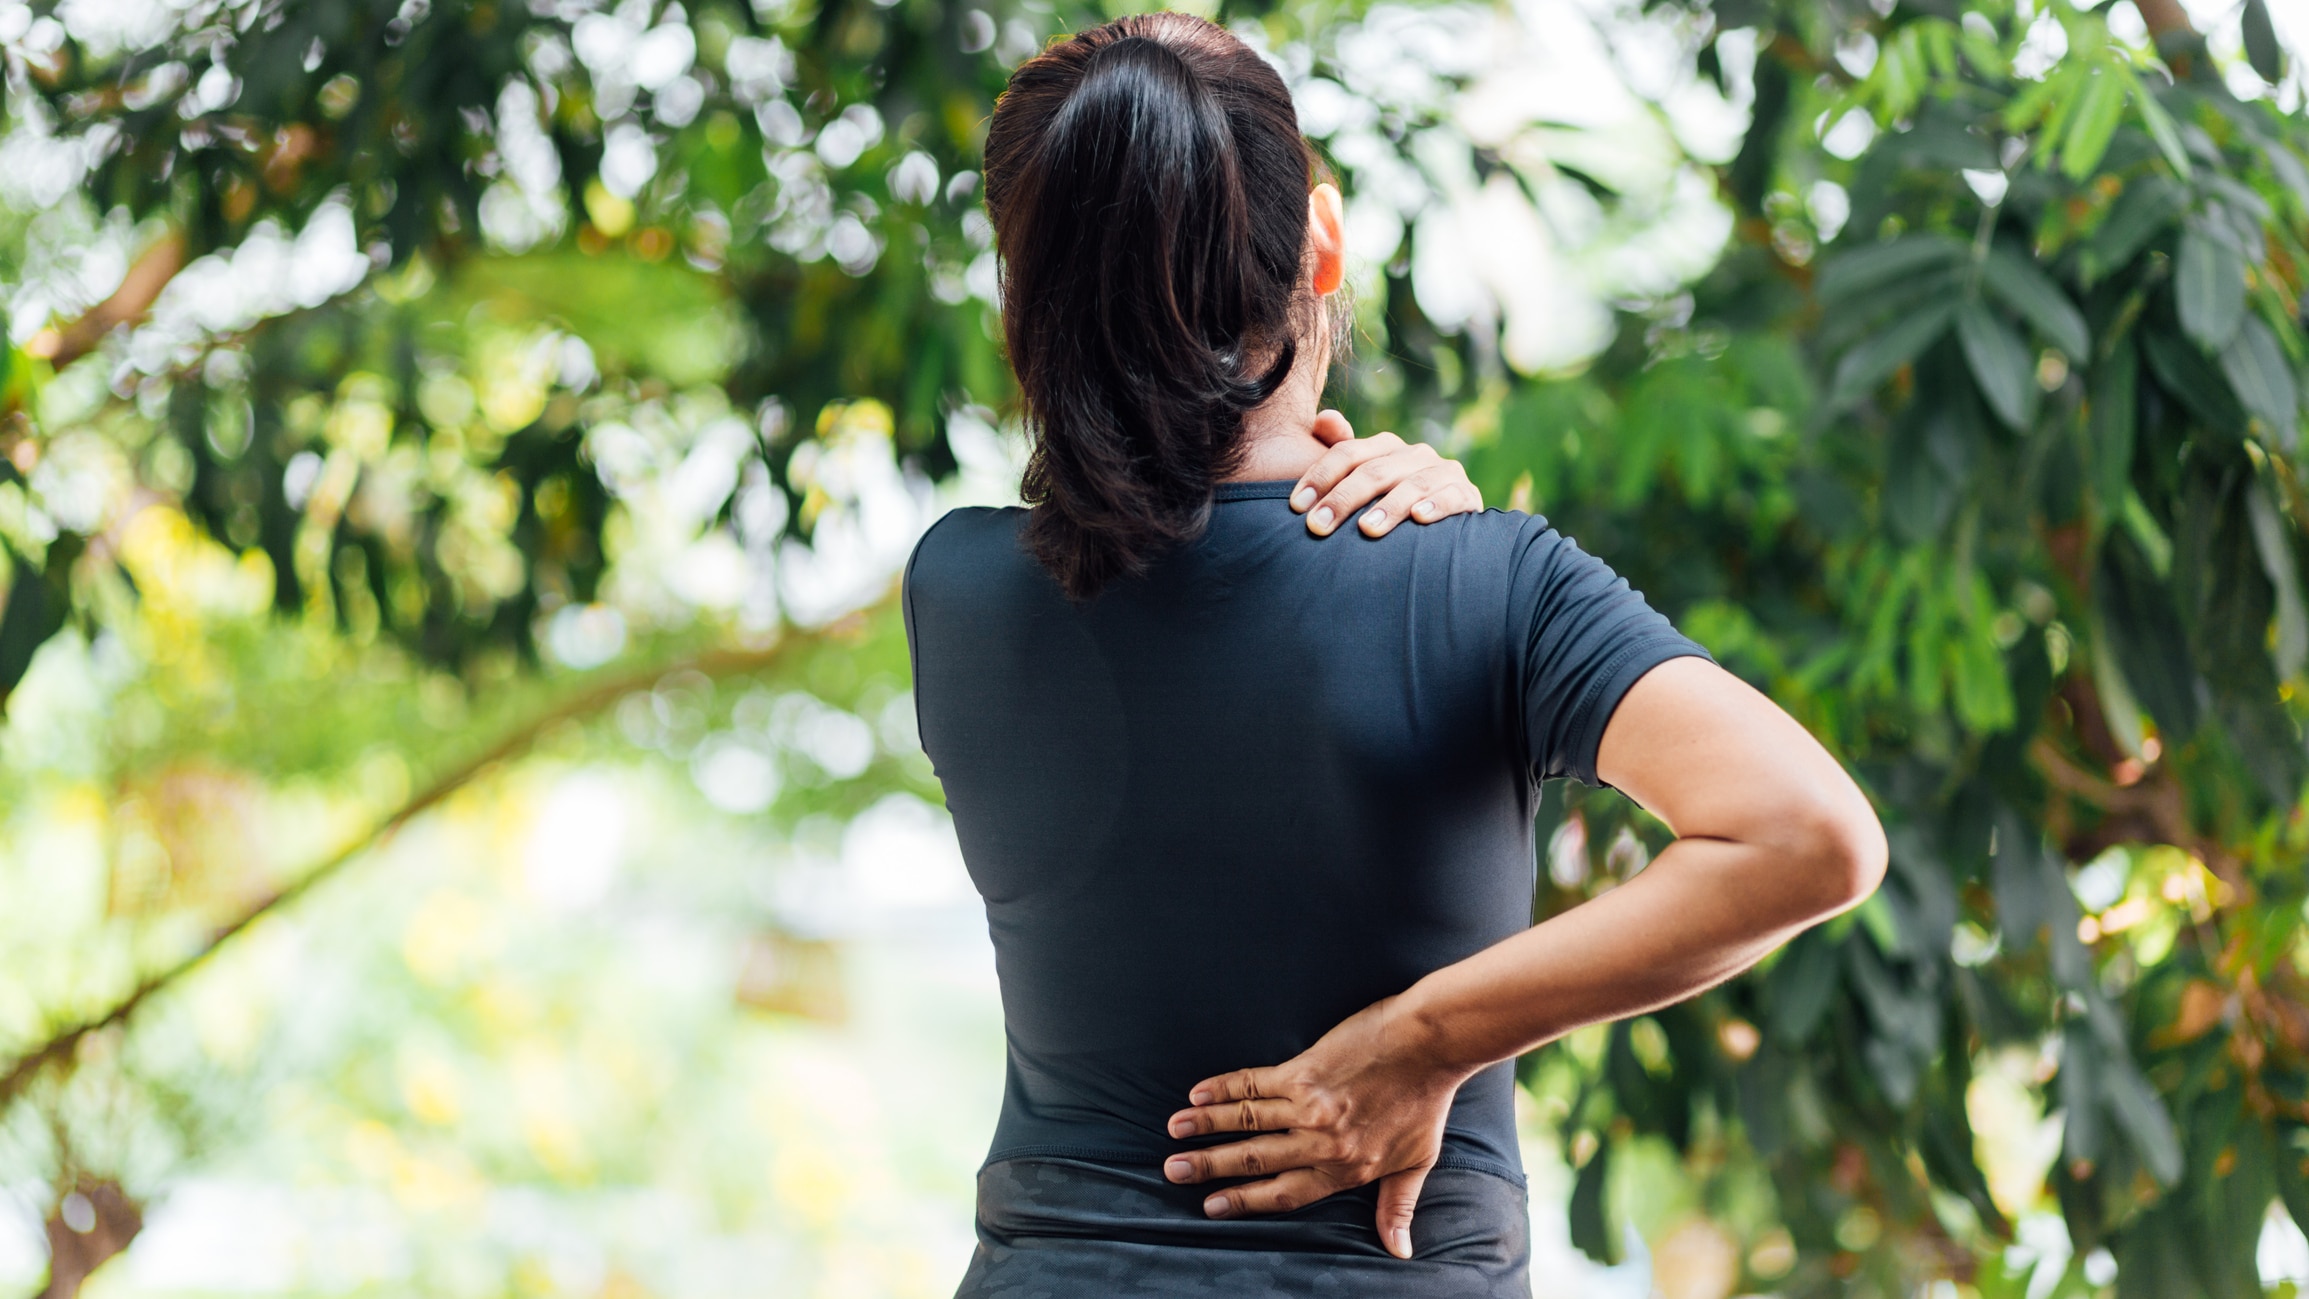 The experienced Portland, Maine spinal injury lawyers at Lowry & Associates want to help you learn everything you need to know about filing a spinal injury case in Portland, Maine.